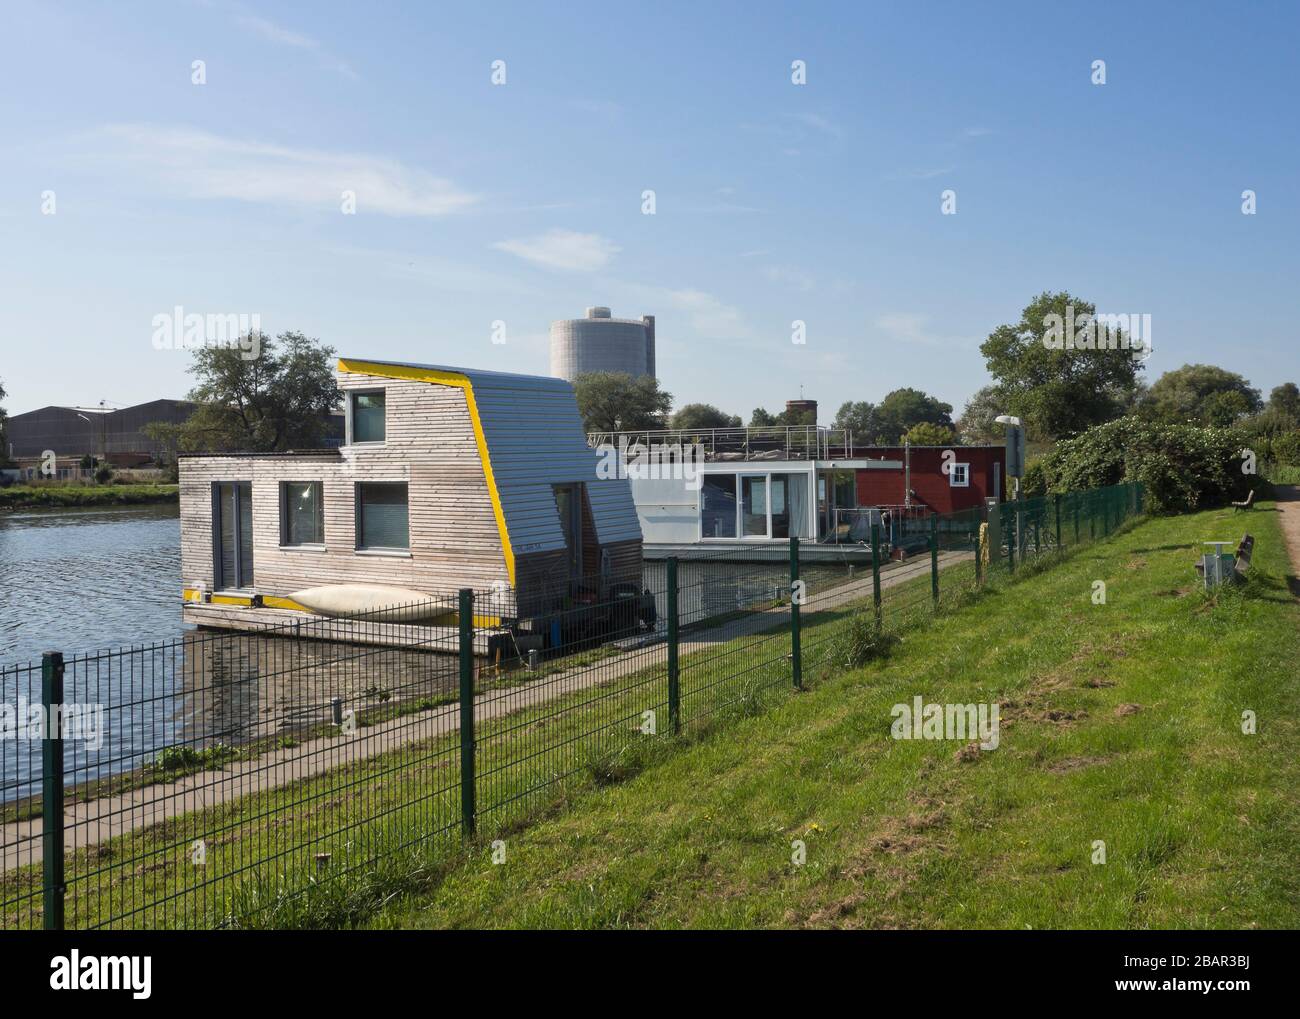 Houseboats along the banks of the river Trave in Lübeck Germany Stock Photo